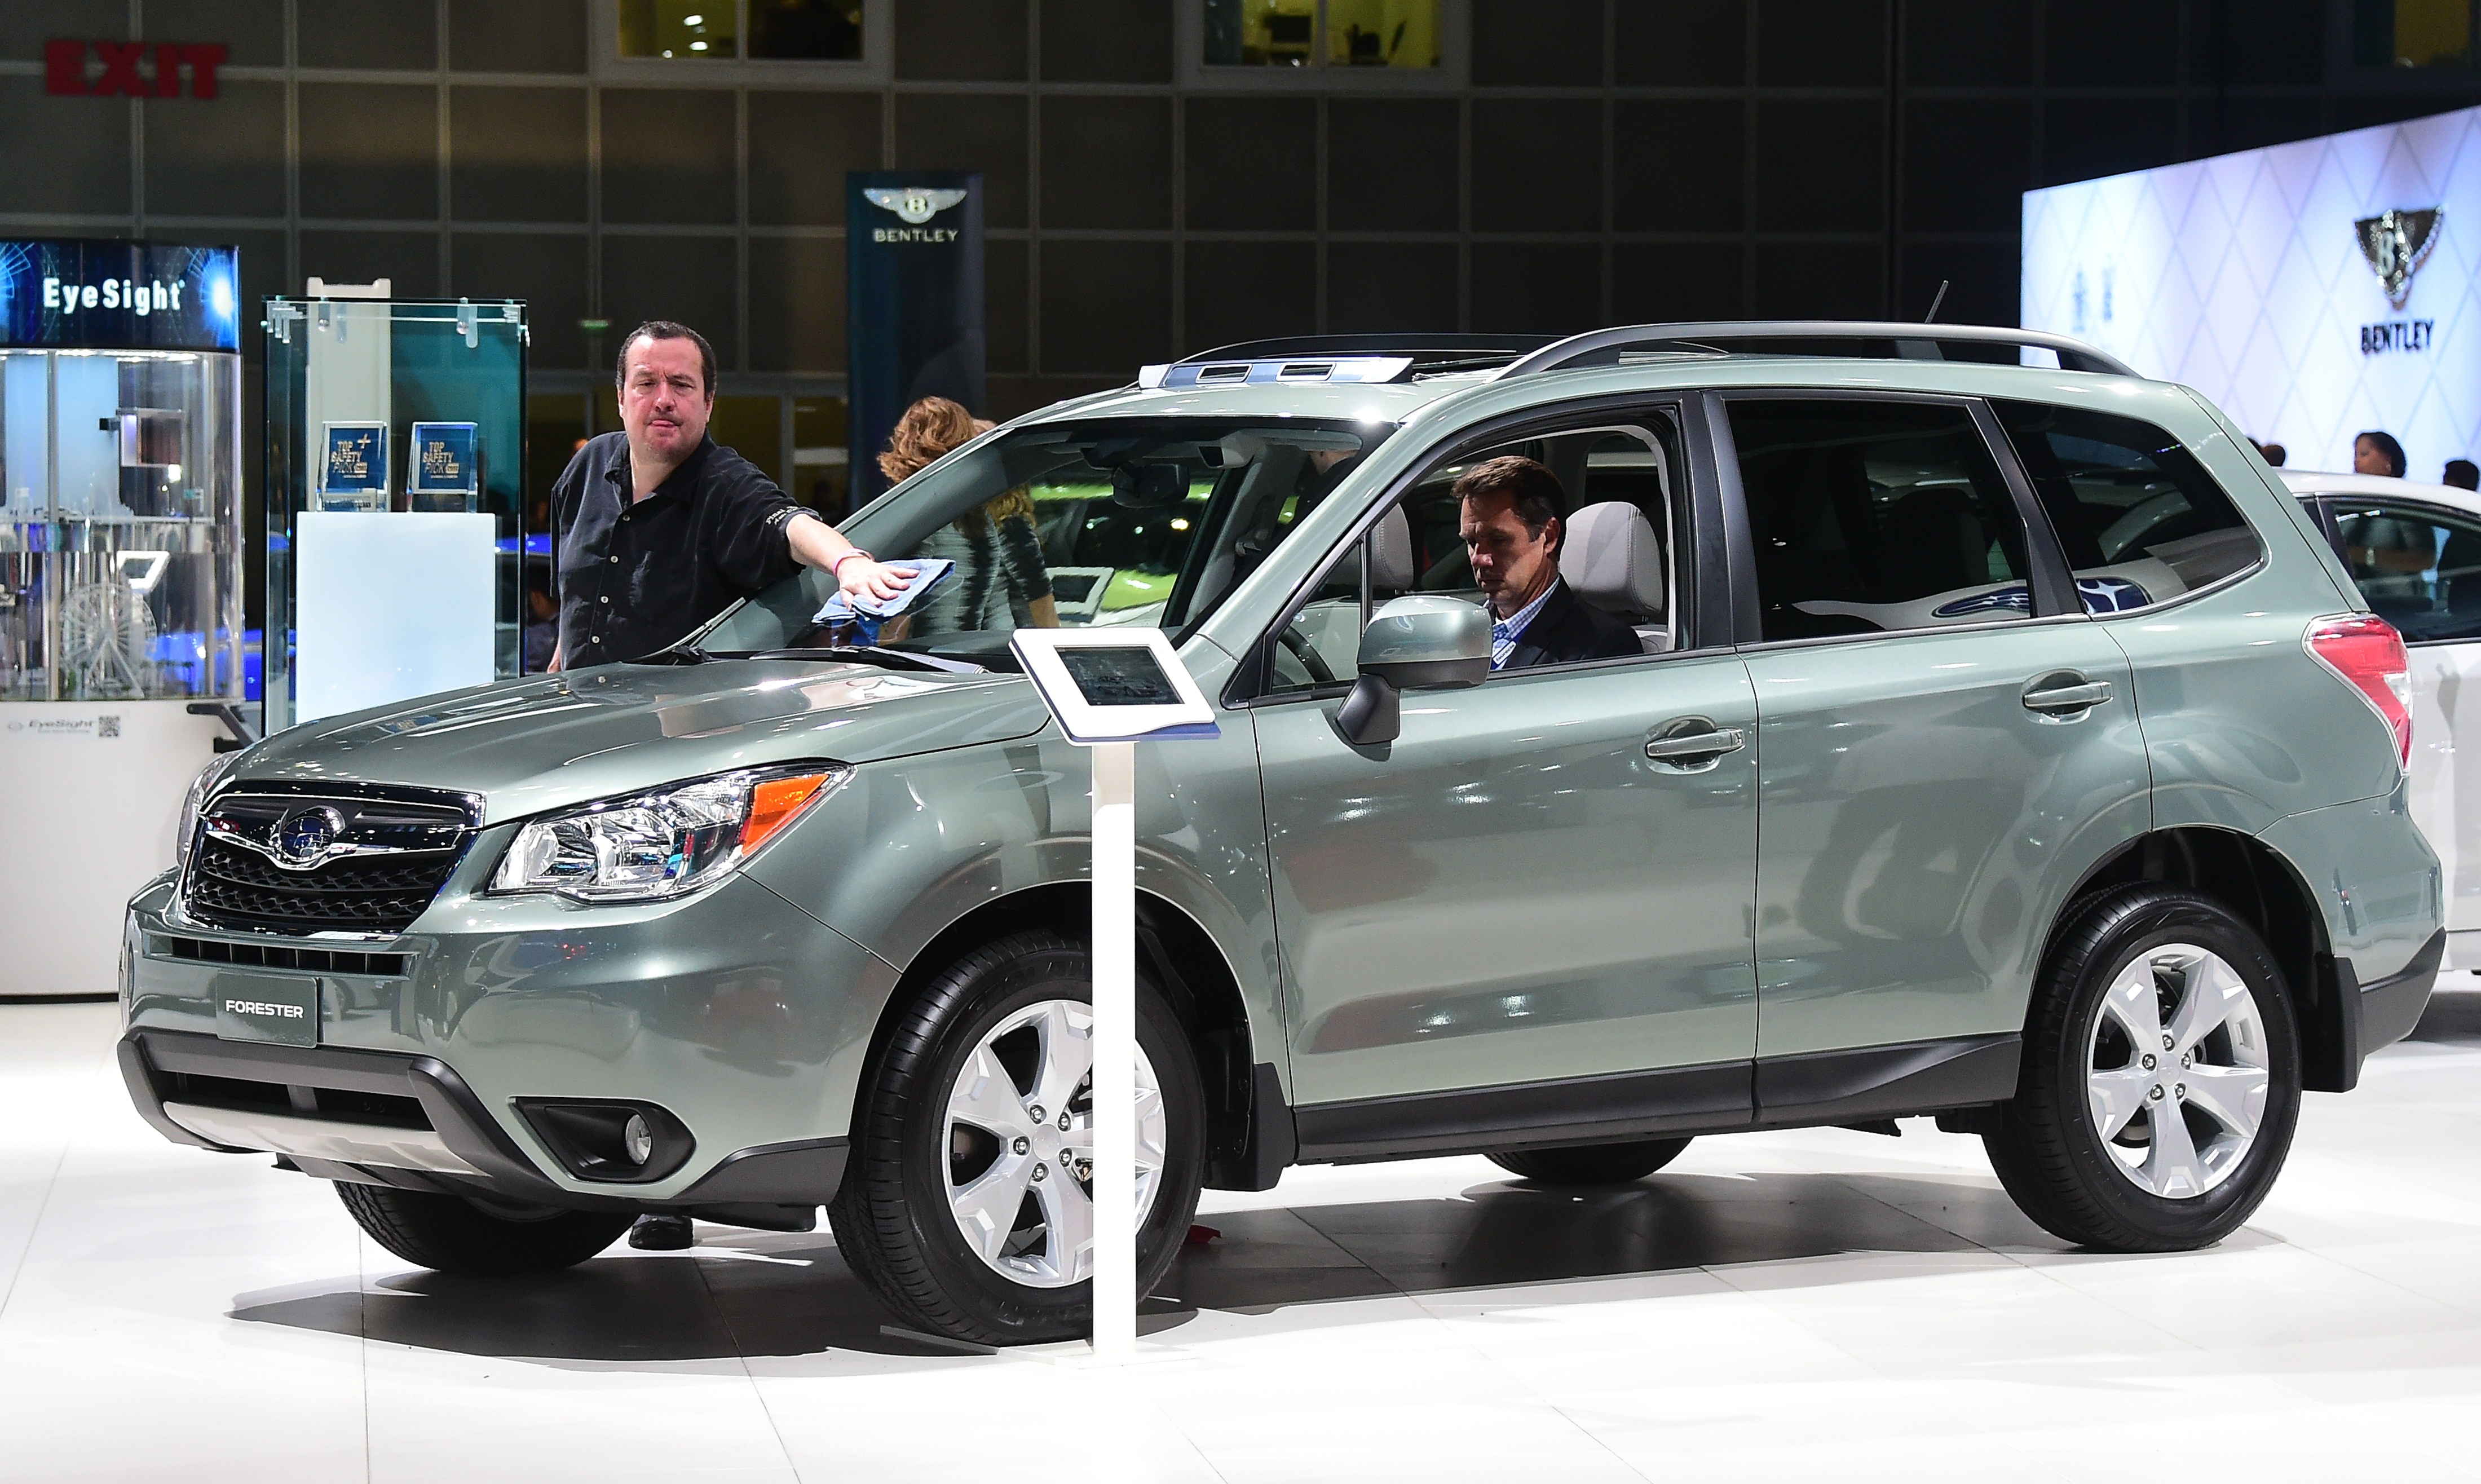 A 2015 Subaru Forester on display at an auto show.